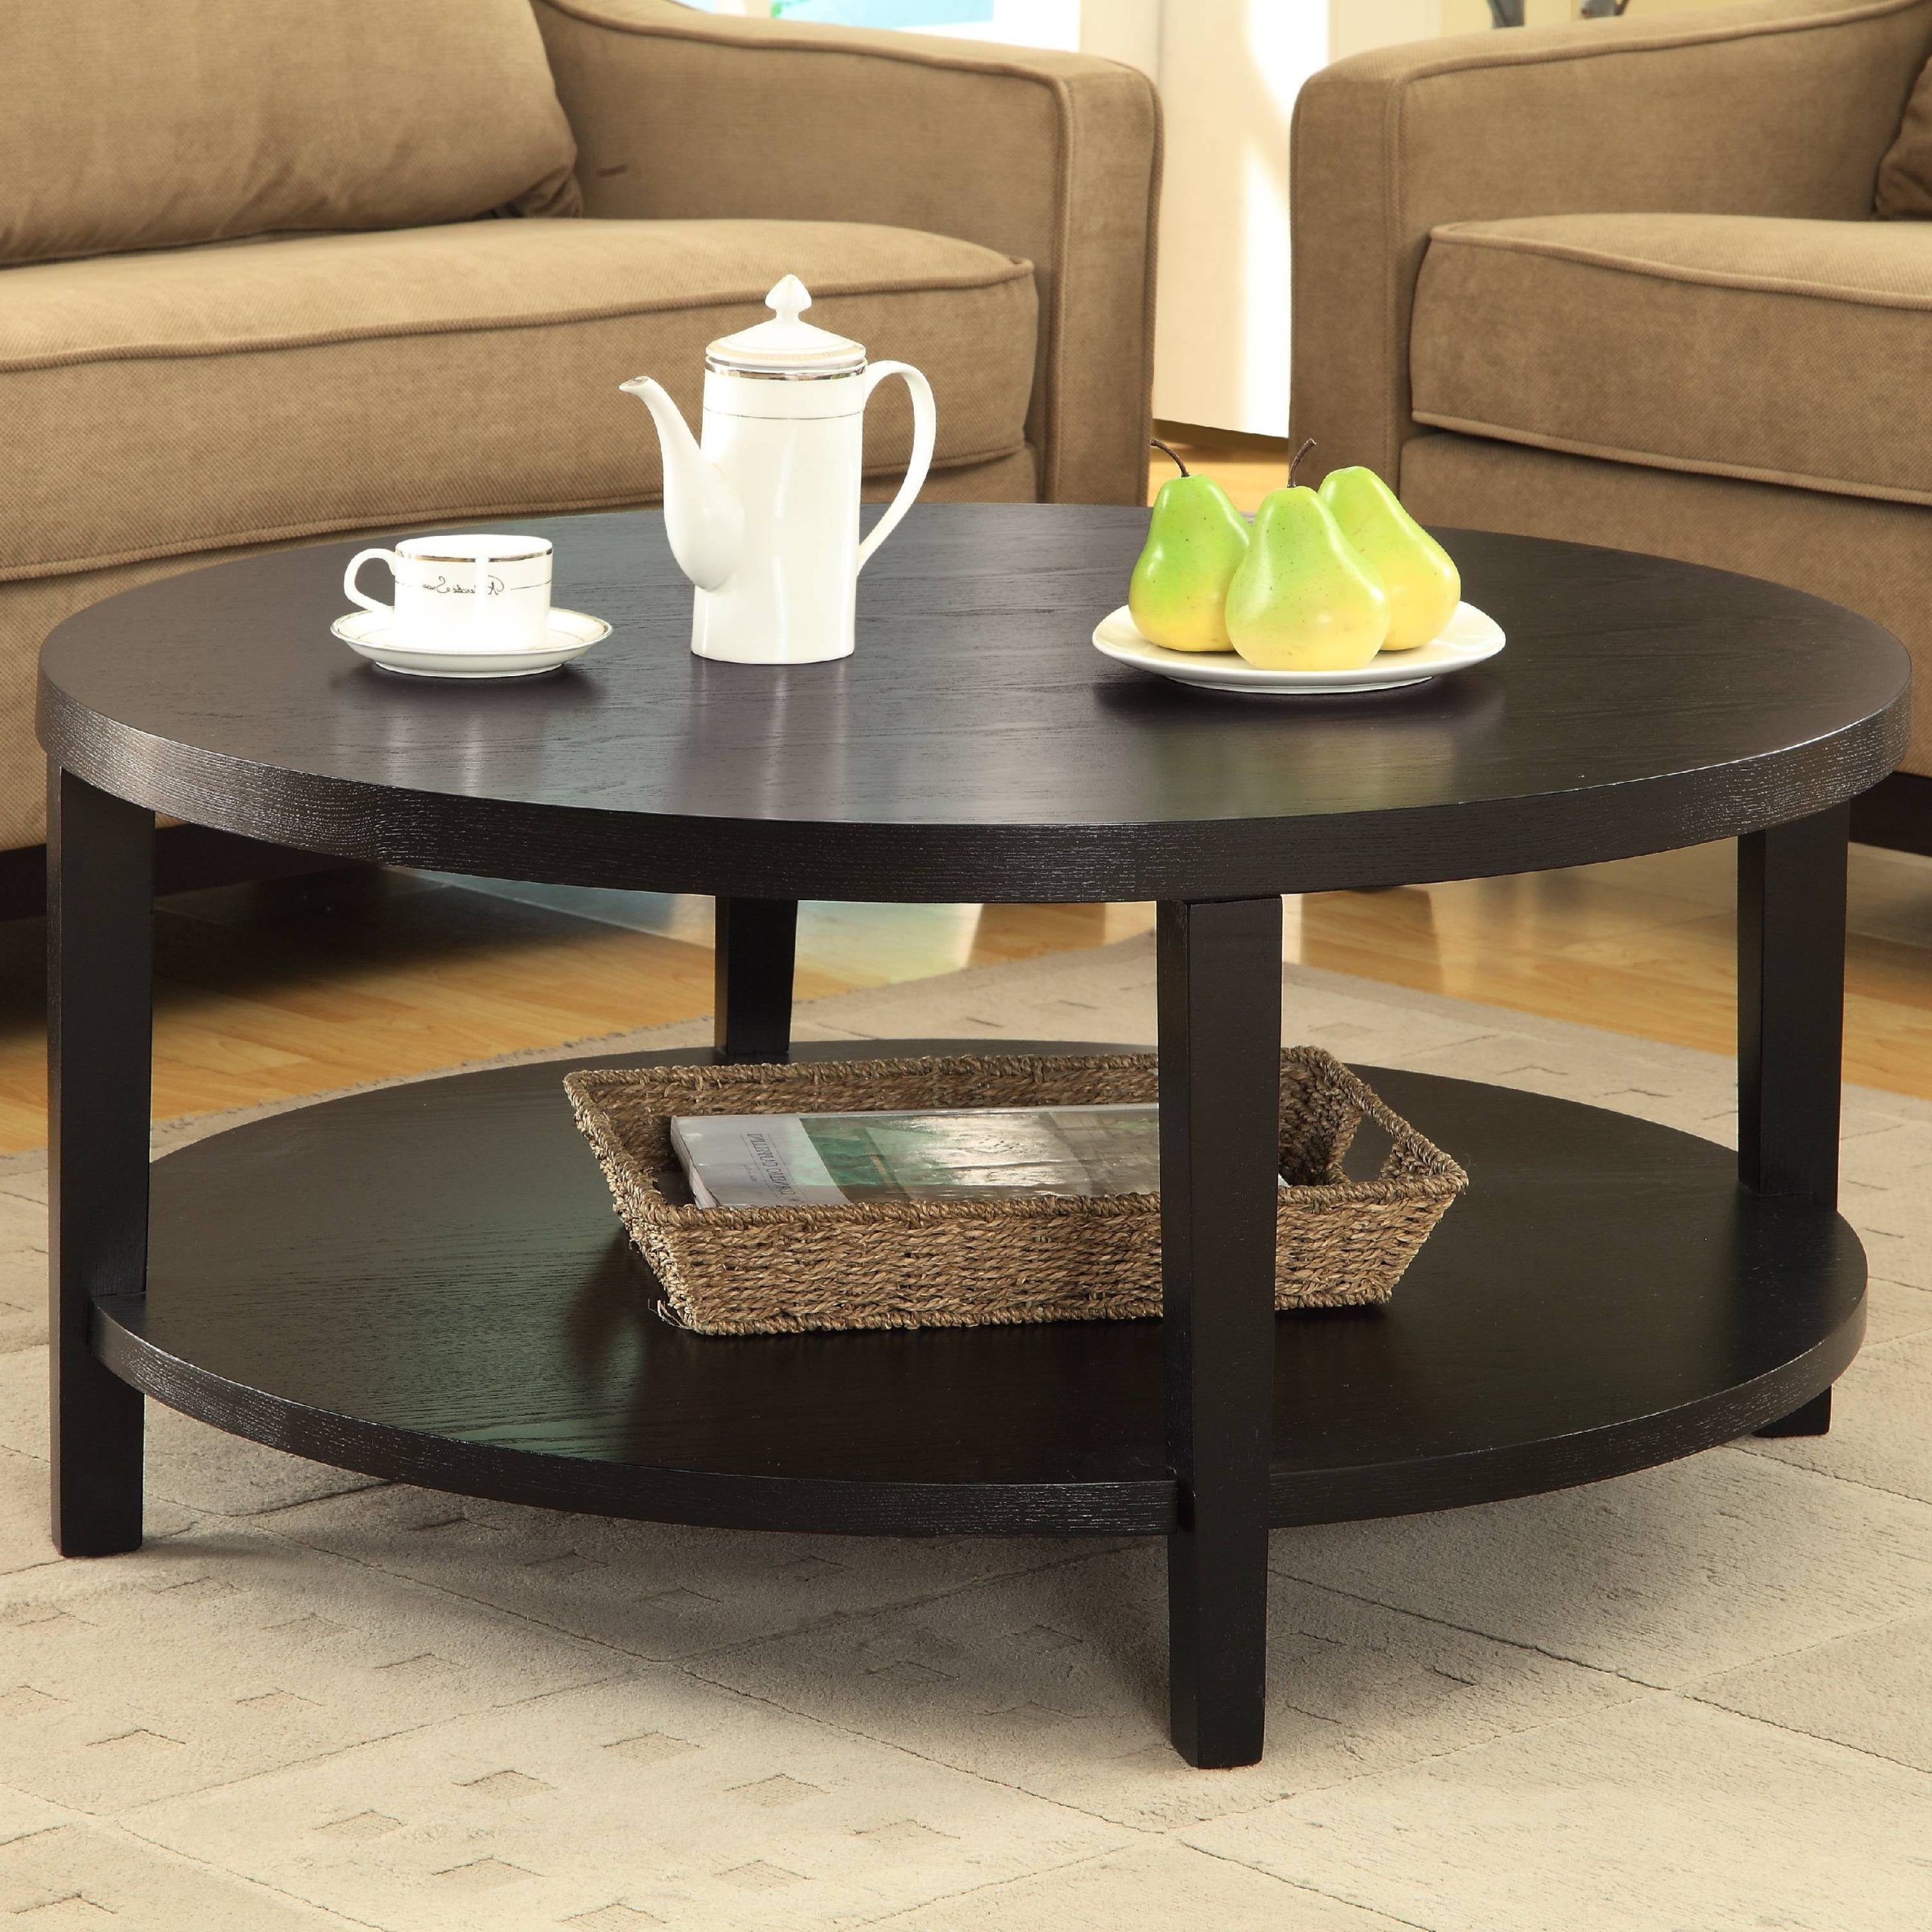 Espresso Round Coffee Table – Southern Enterprises Voyager Espresso Regarding Most Recent Round Coffee Tables With Storage (View 13 of 15)